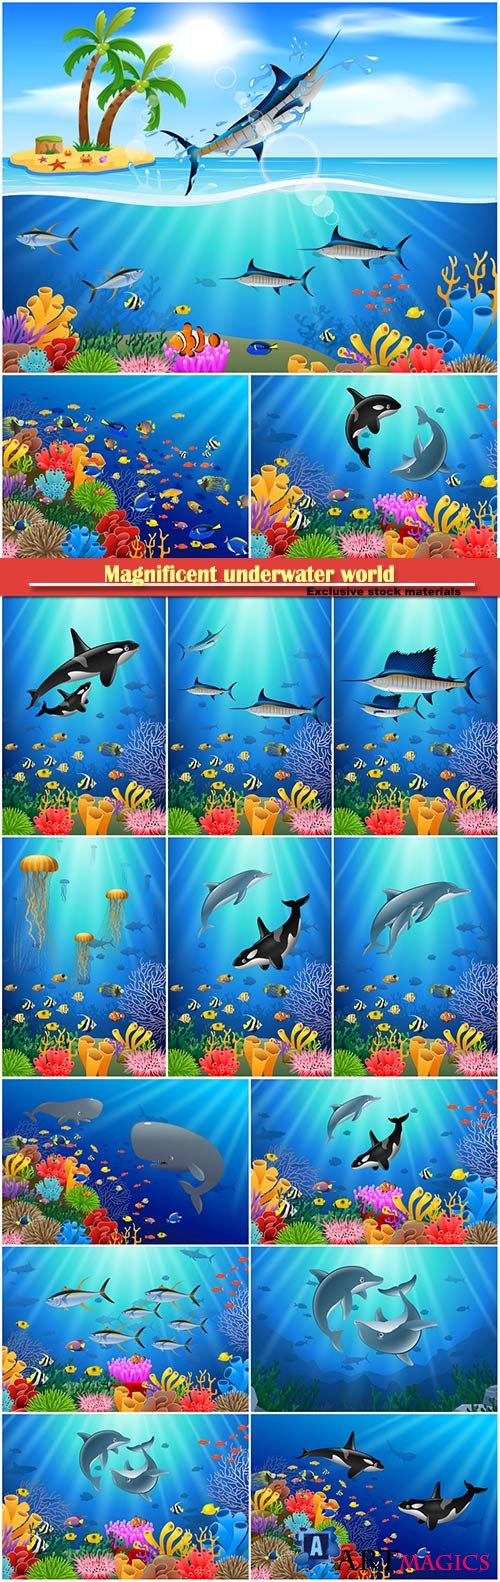 Magnificent underwater world and its inhabitants, vector dolphins, whales, fishes